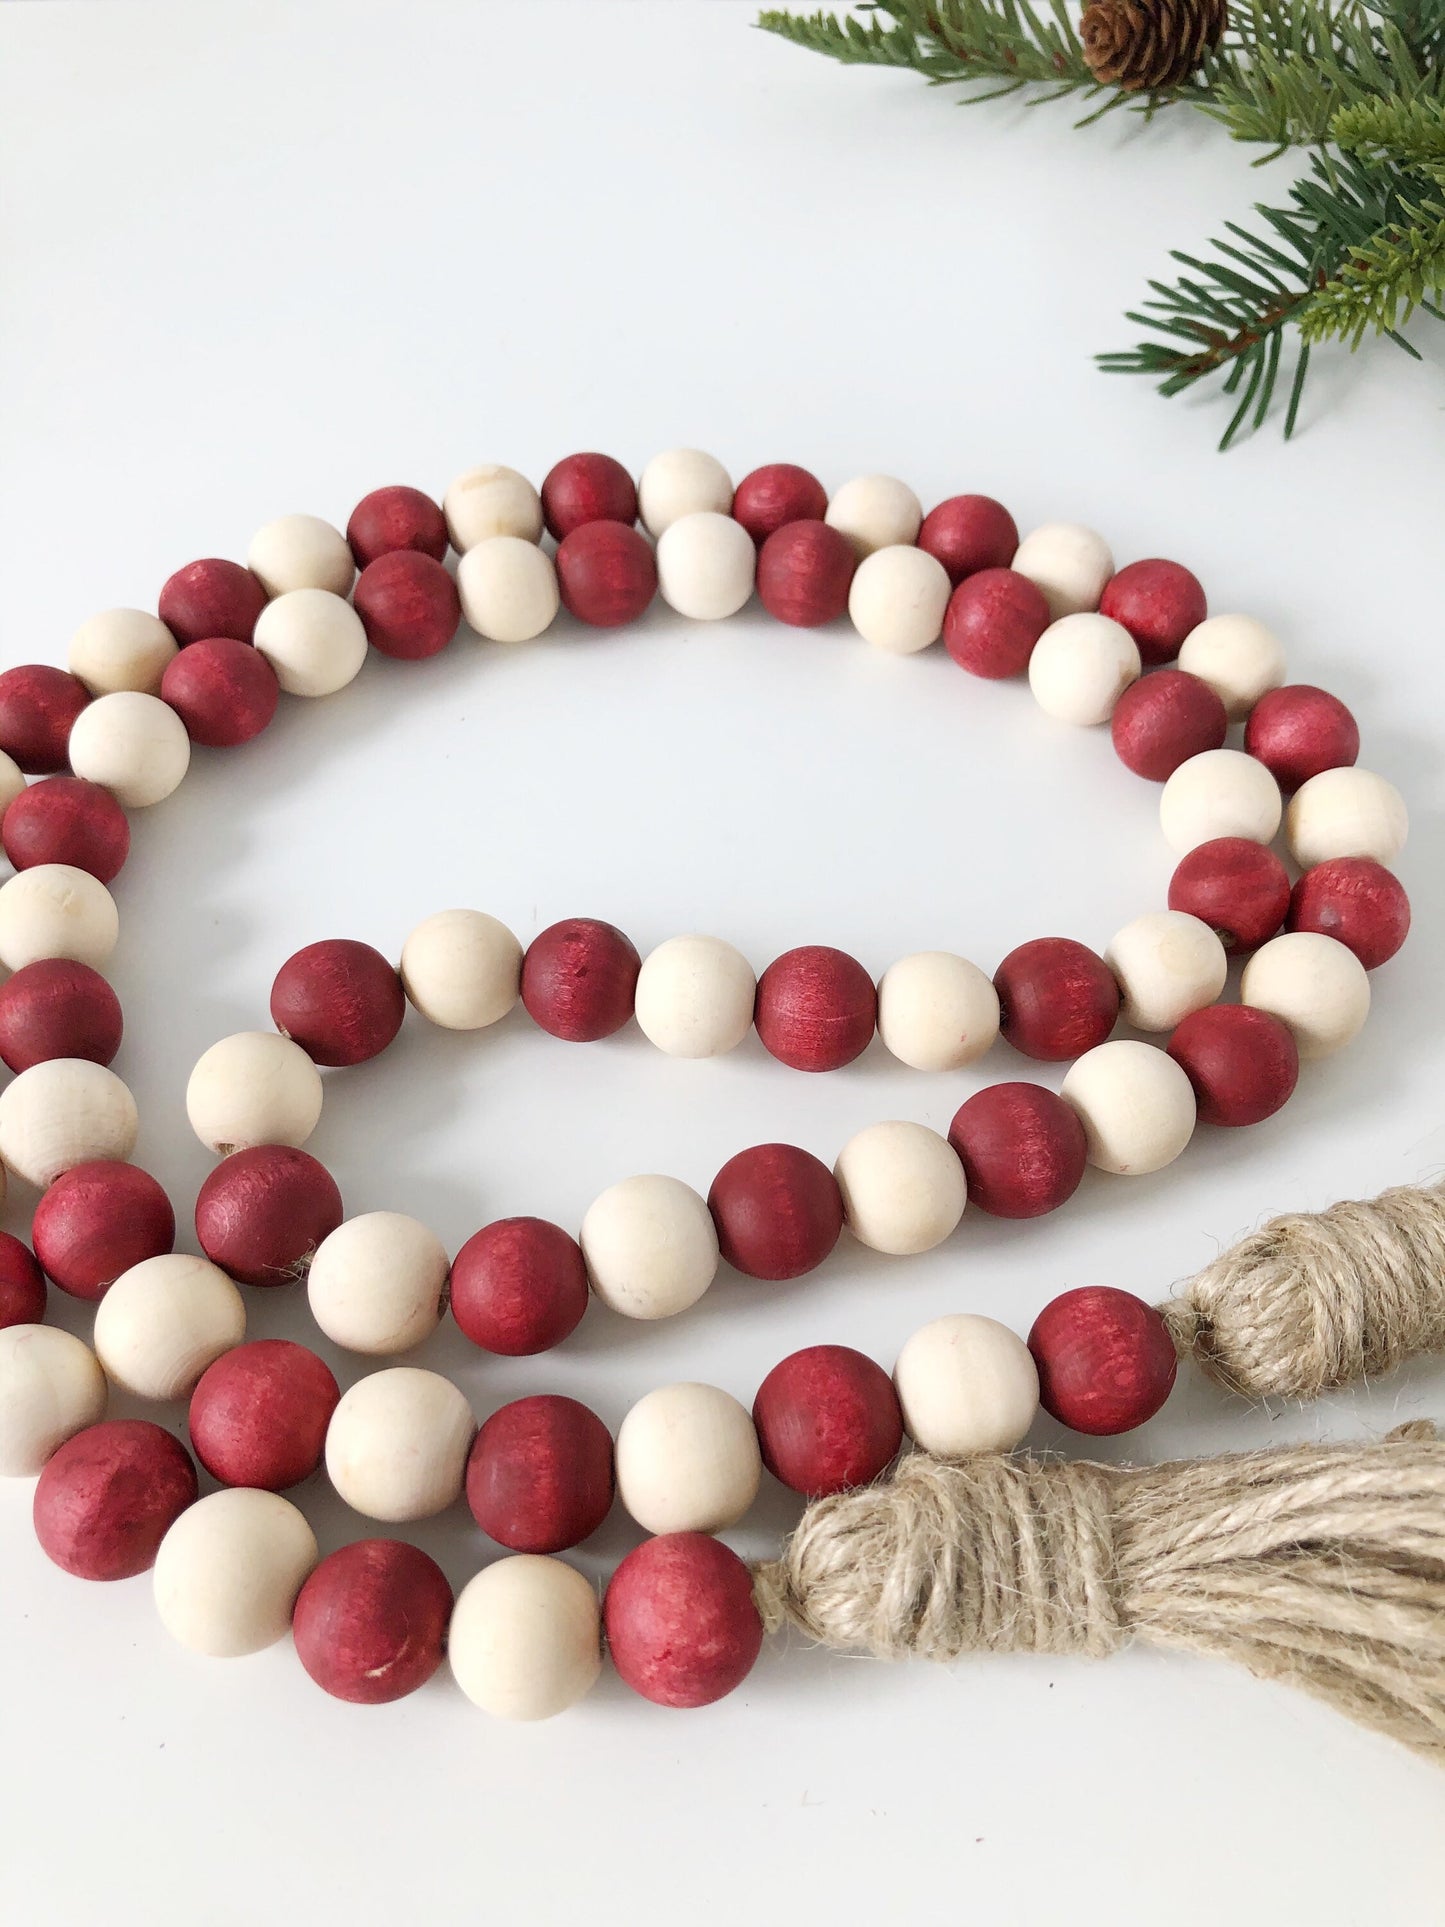 QIIBURR Red Wooden Beads Garland Wood Beads Garland with Tassels 5 Styles  Beads Rustic Natural Wooden Bead Wood Garland Beads 